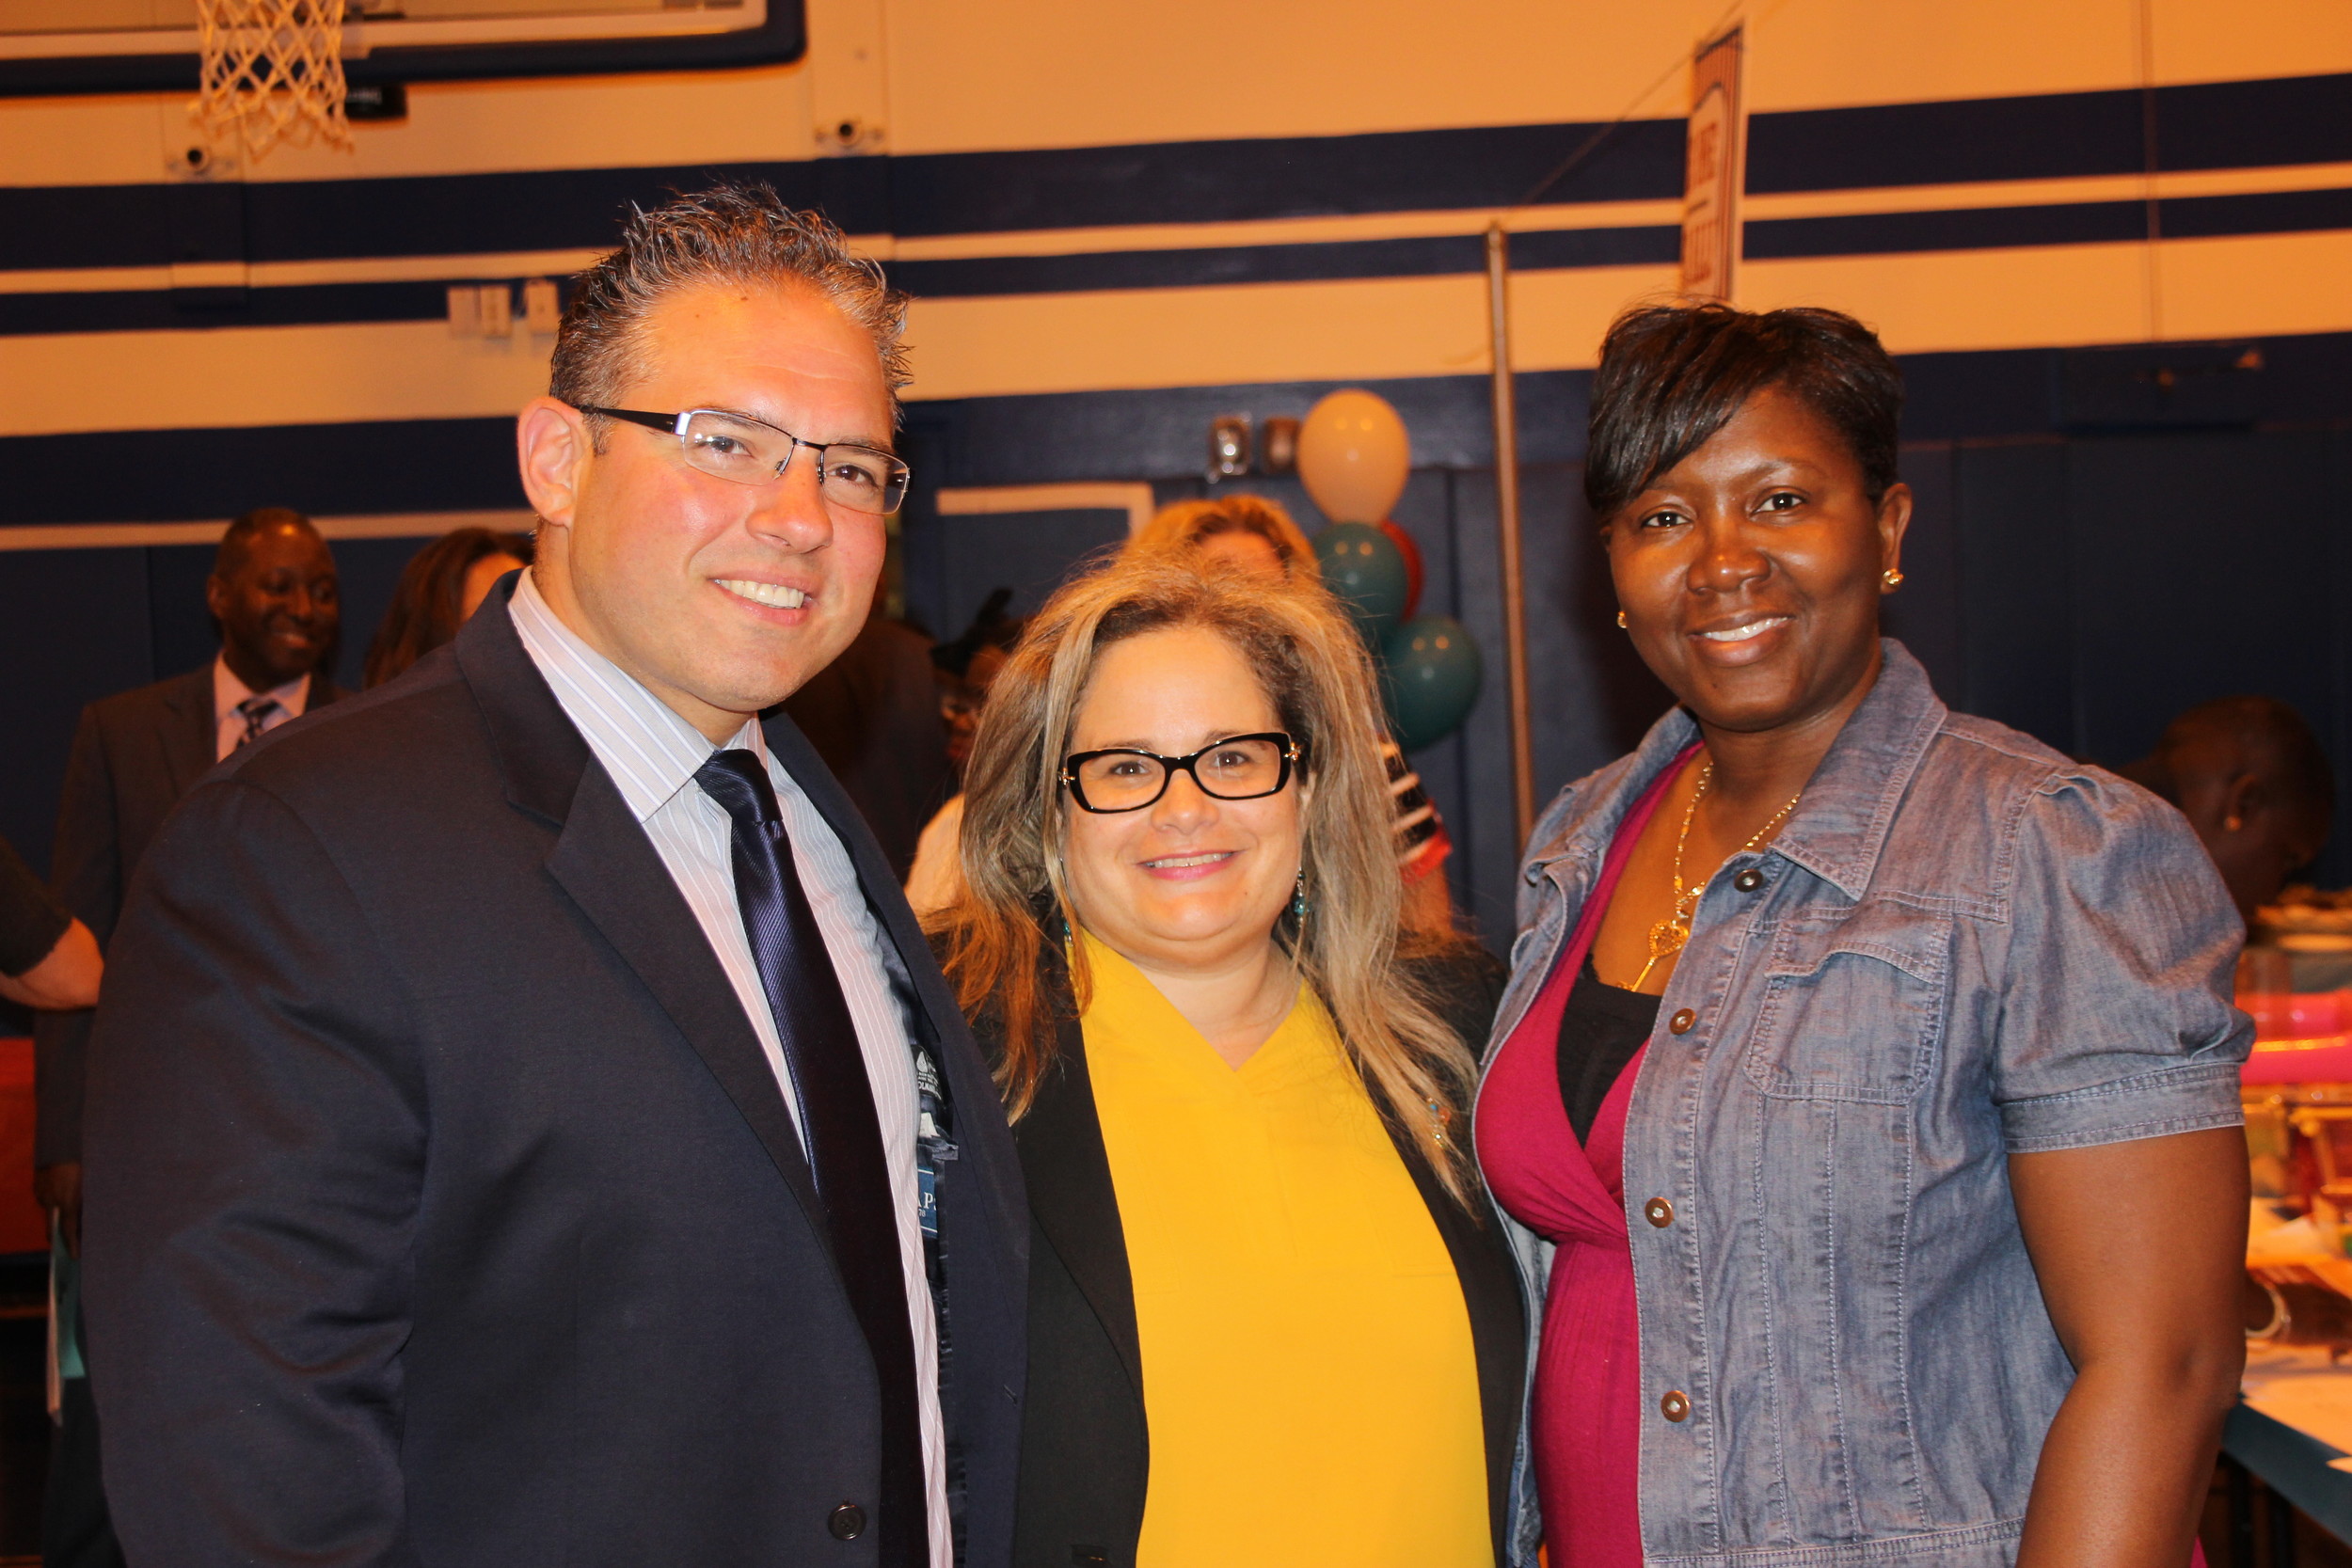 Shaw Avenue Assistant Principal Christopher Colarossi, at left, Director of Special Services Nicole Schimpf and District 30 parent Andrea Morris-Abrahams mingled with parents and faculty.